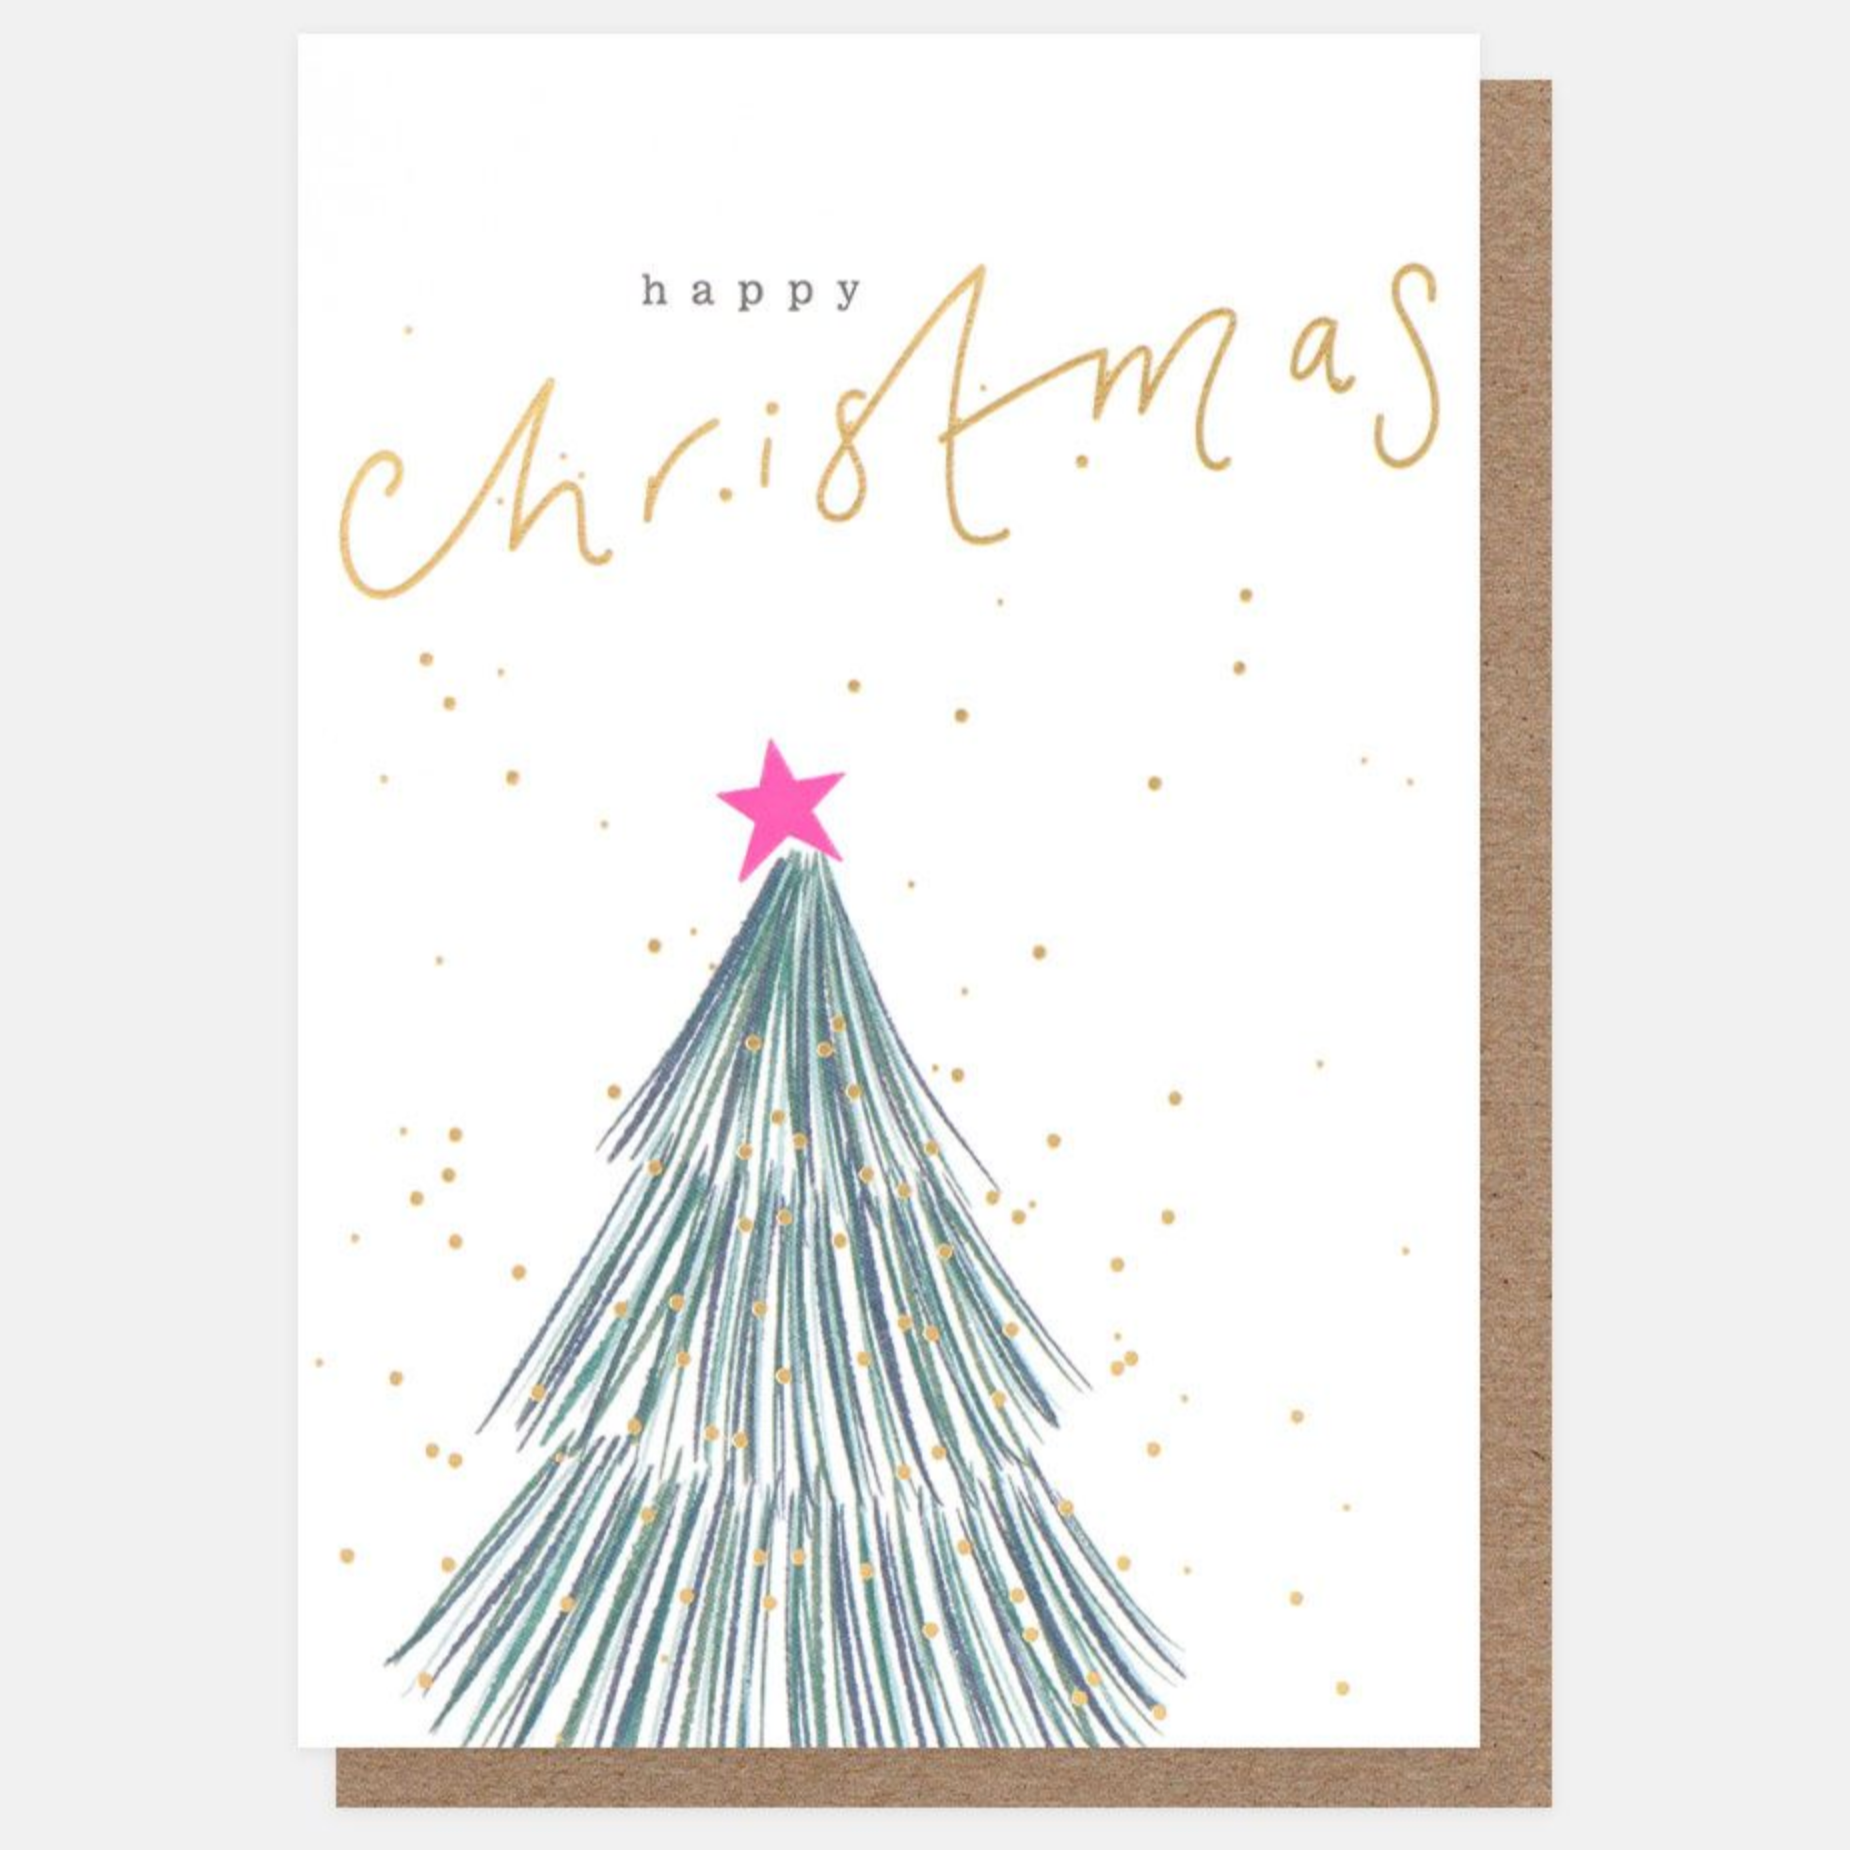 Pack of Ten Gold Embossed Christmas Cards